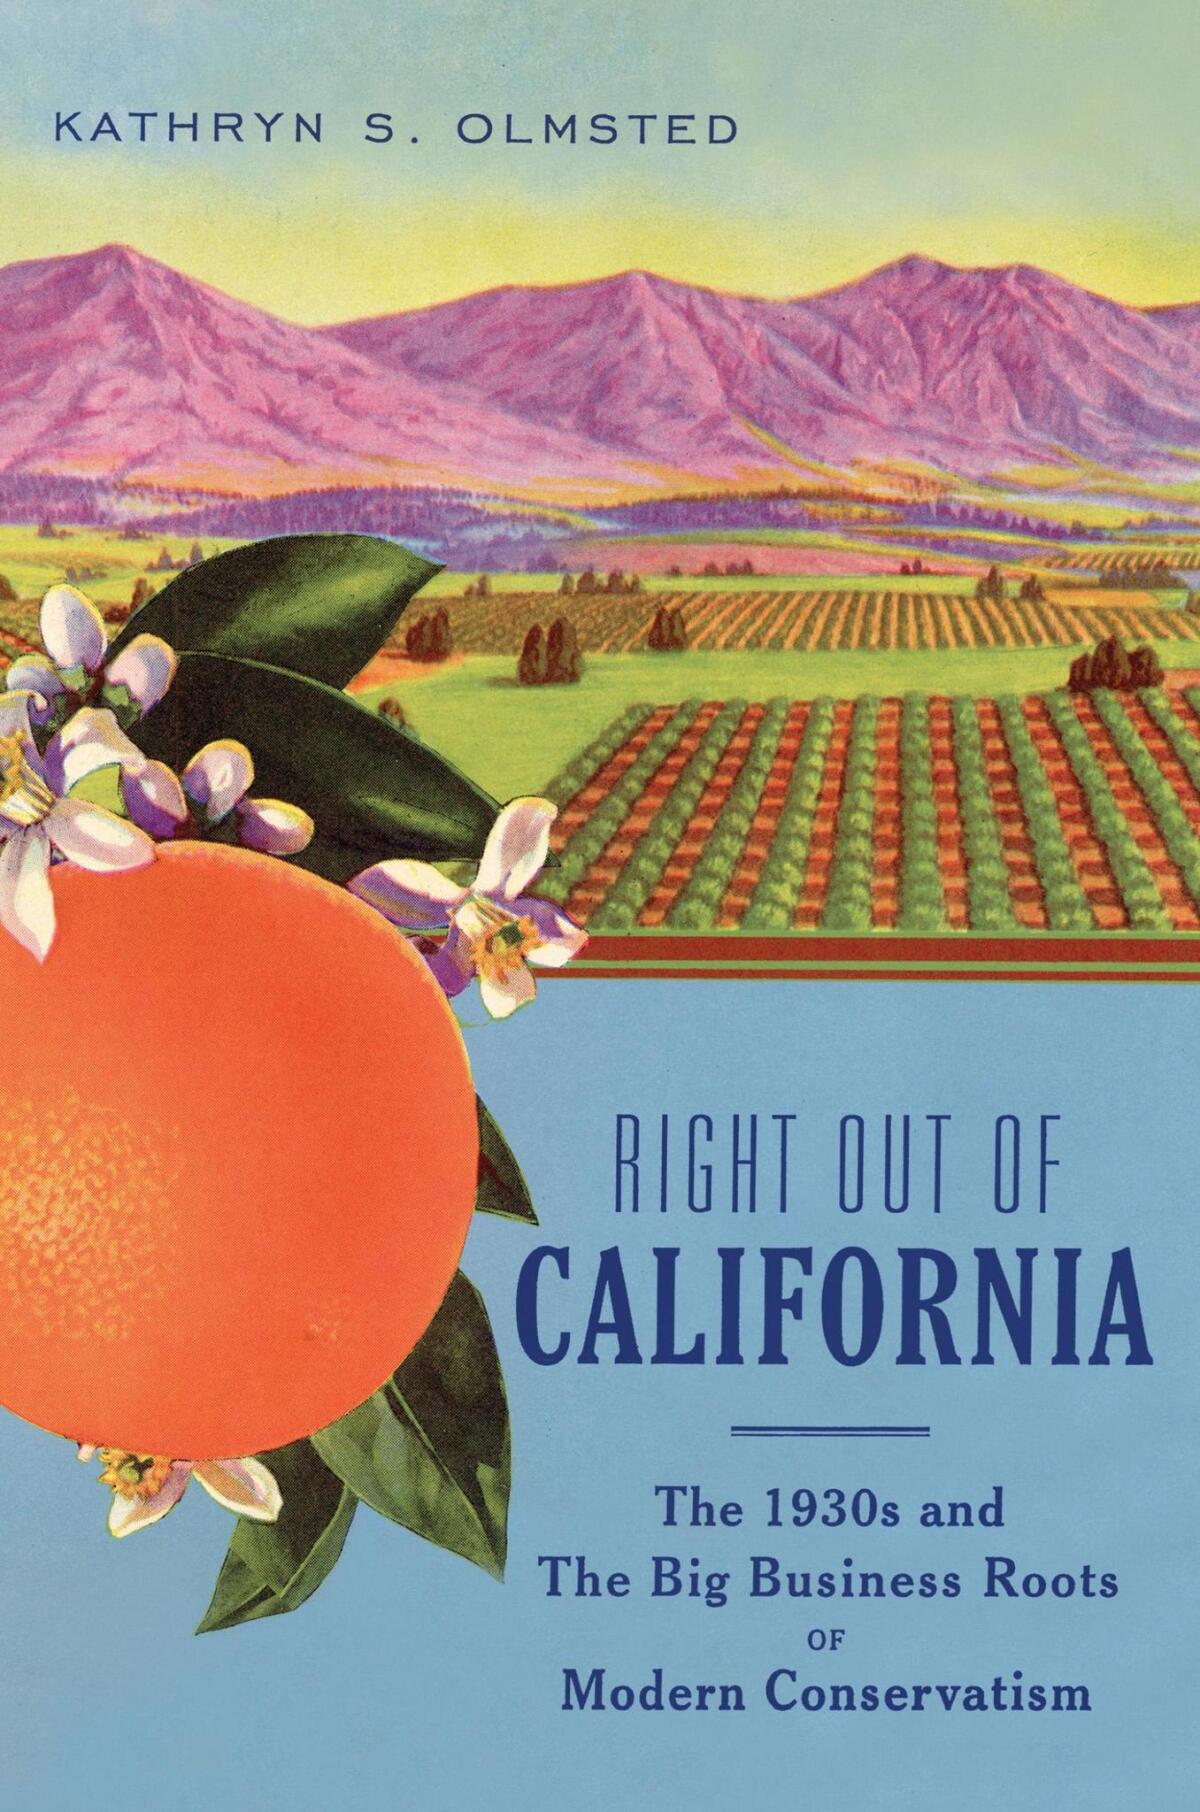 "Right Out of California" by Kathryn Olmsted